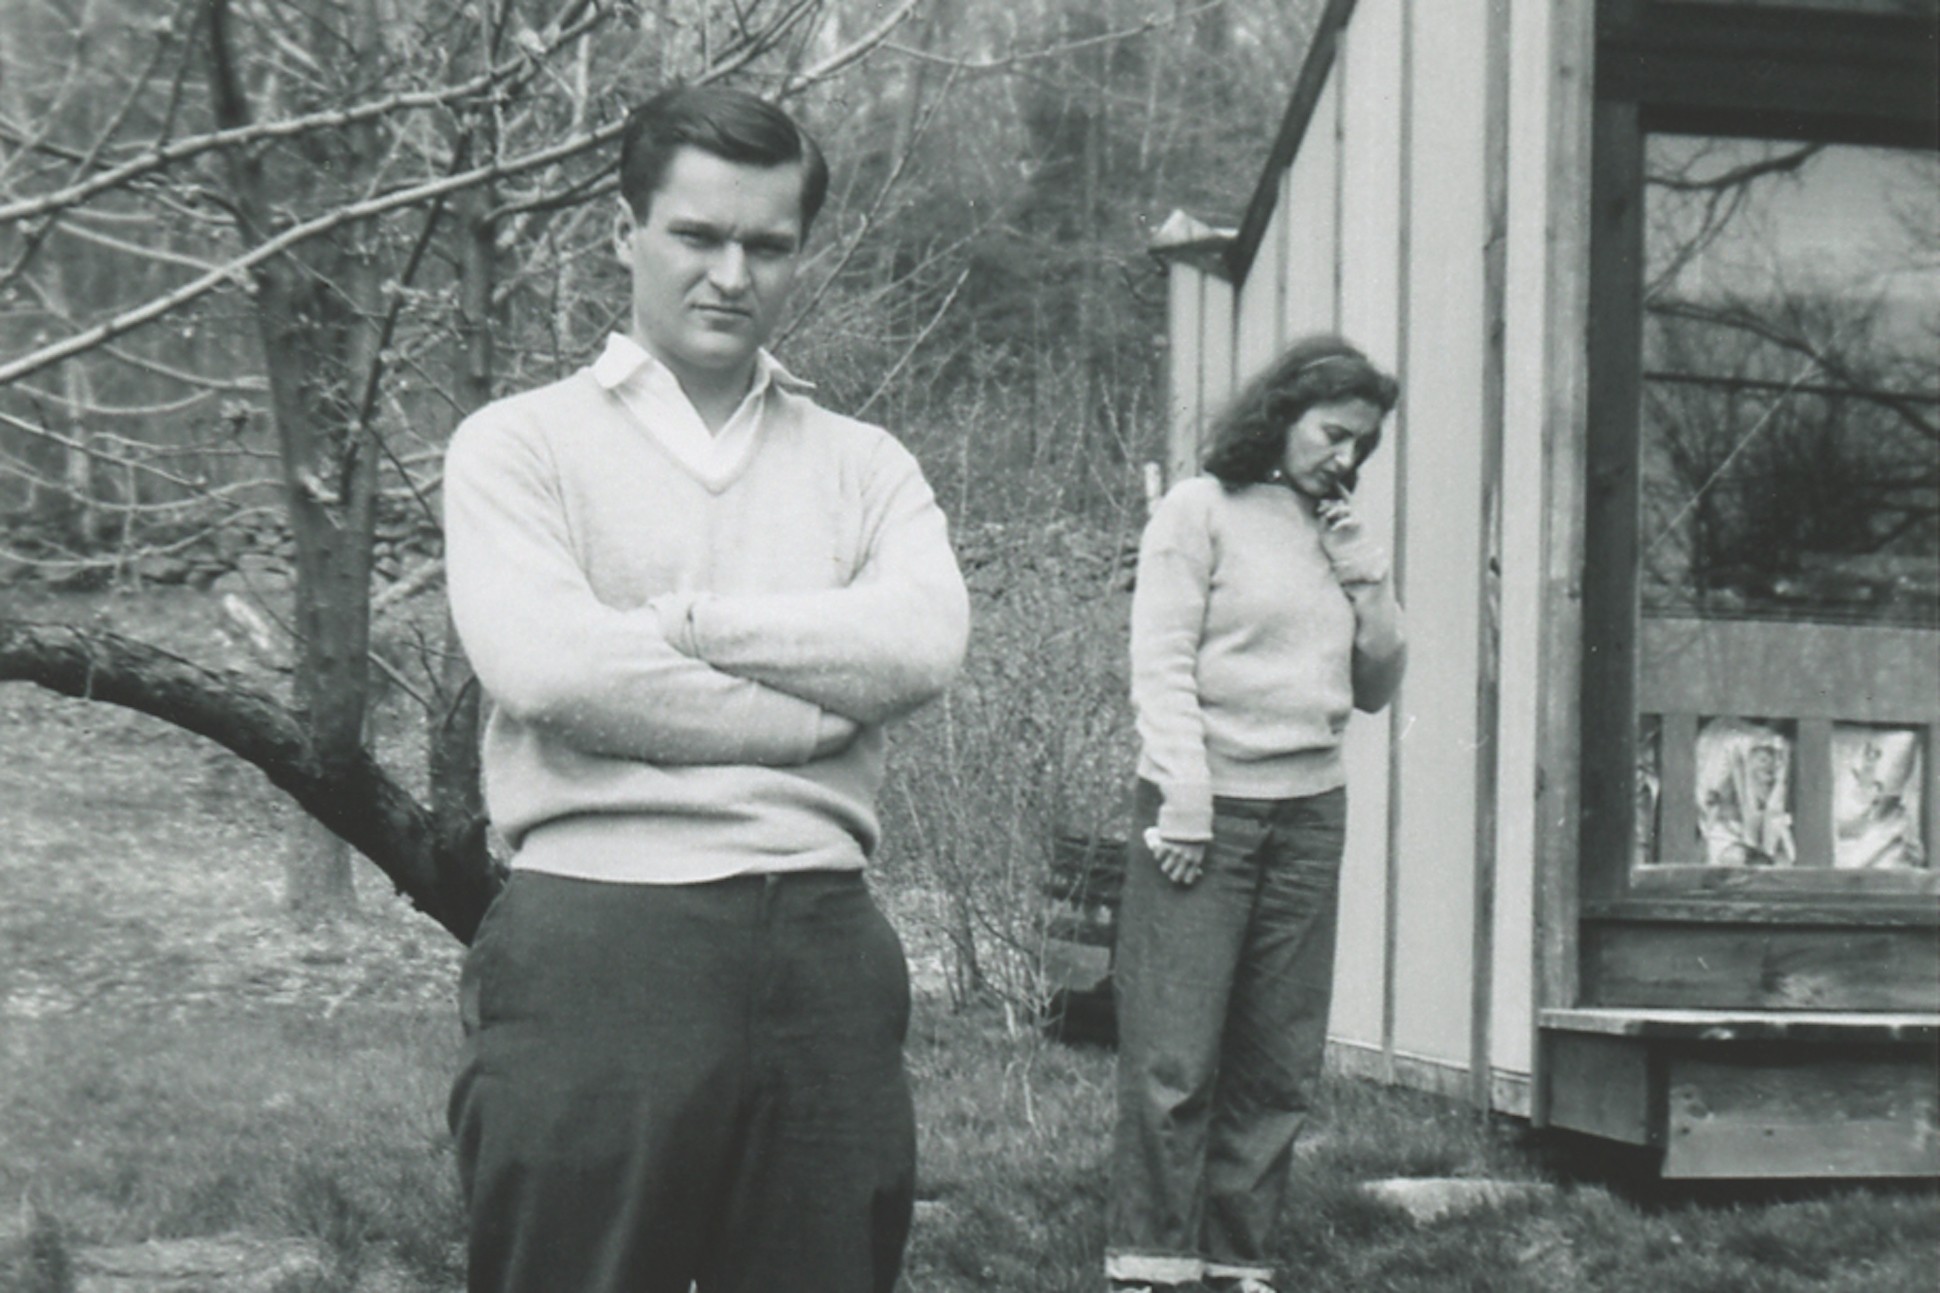 Black and white image of John Ashbery and Jane Freilicher standing near a building in Cornwall, Connecticut in 1954.